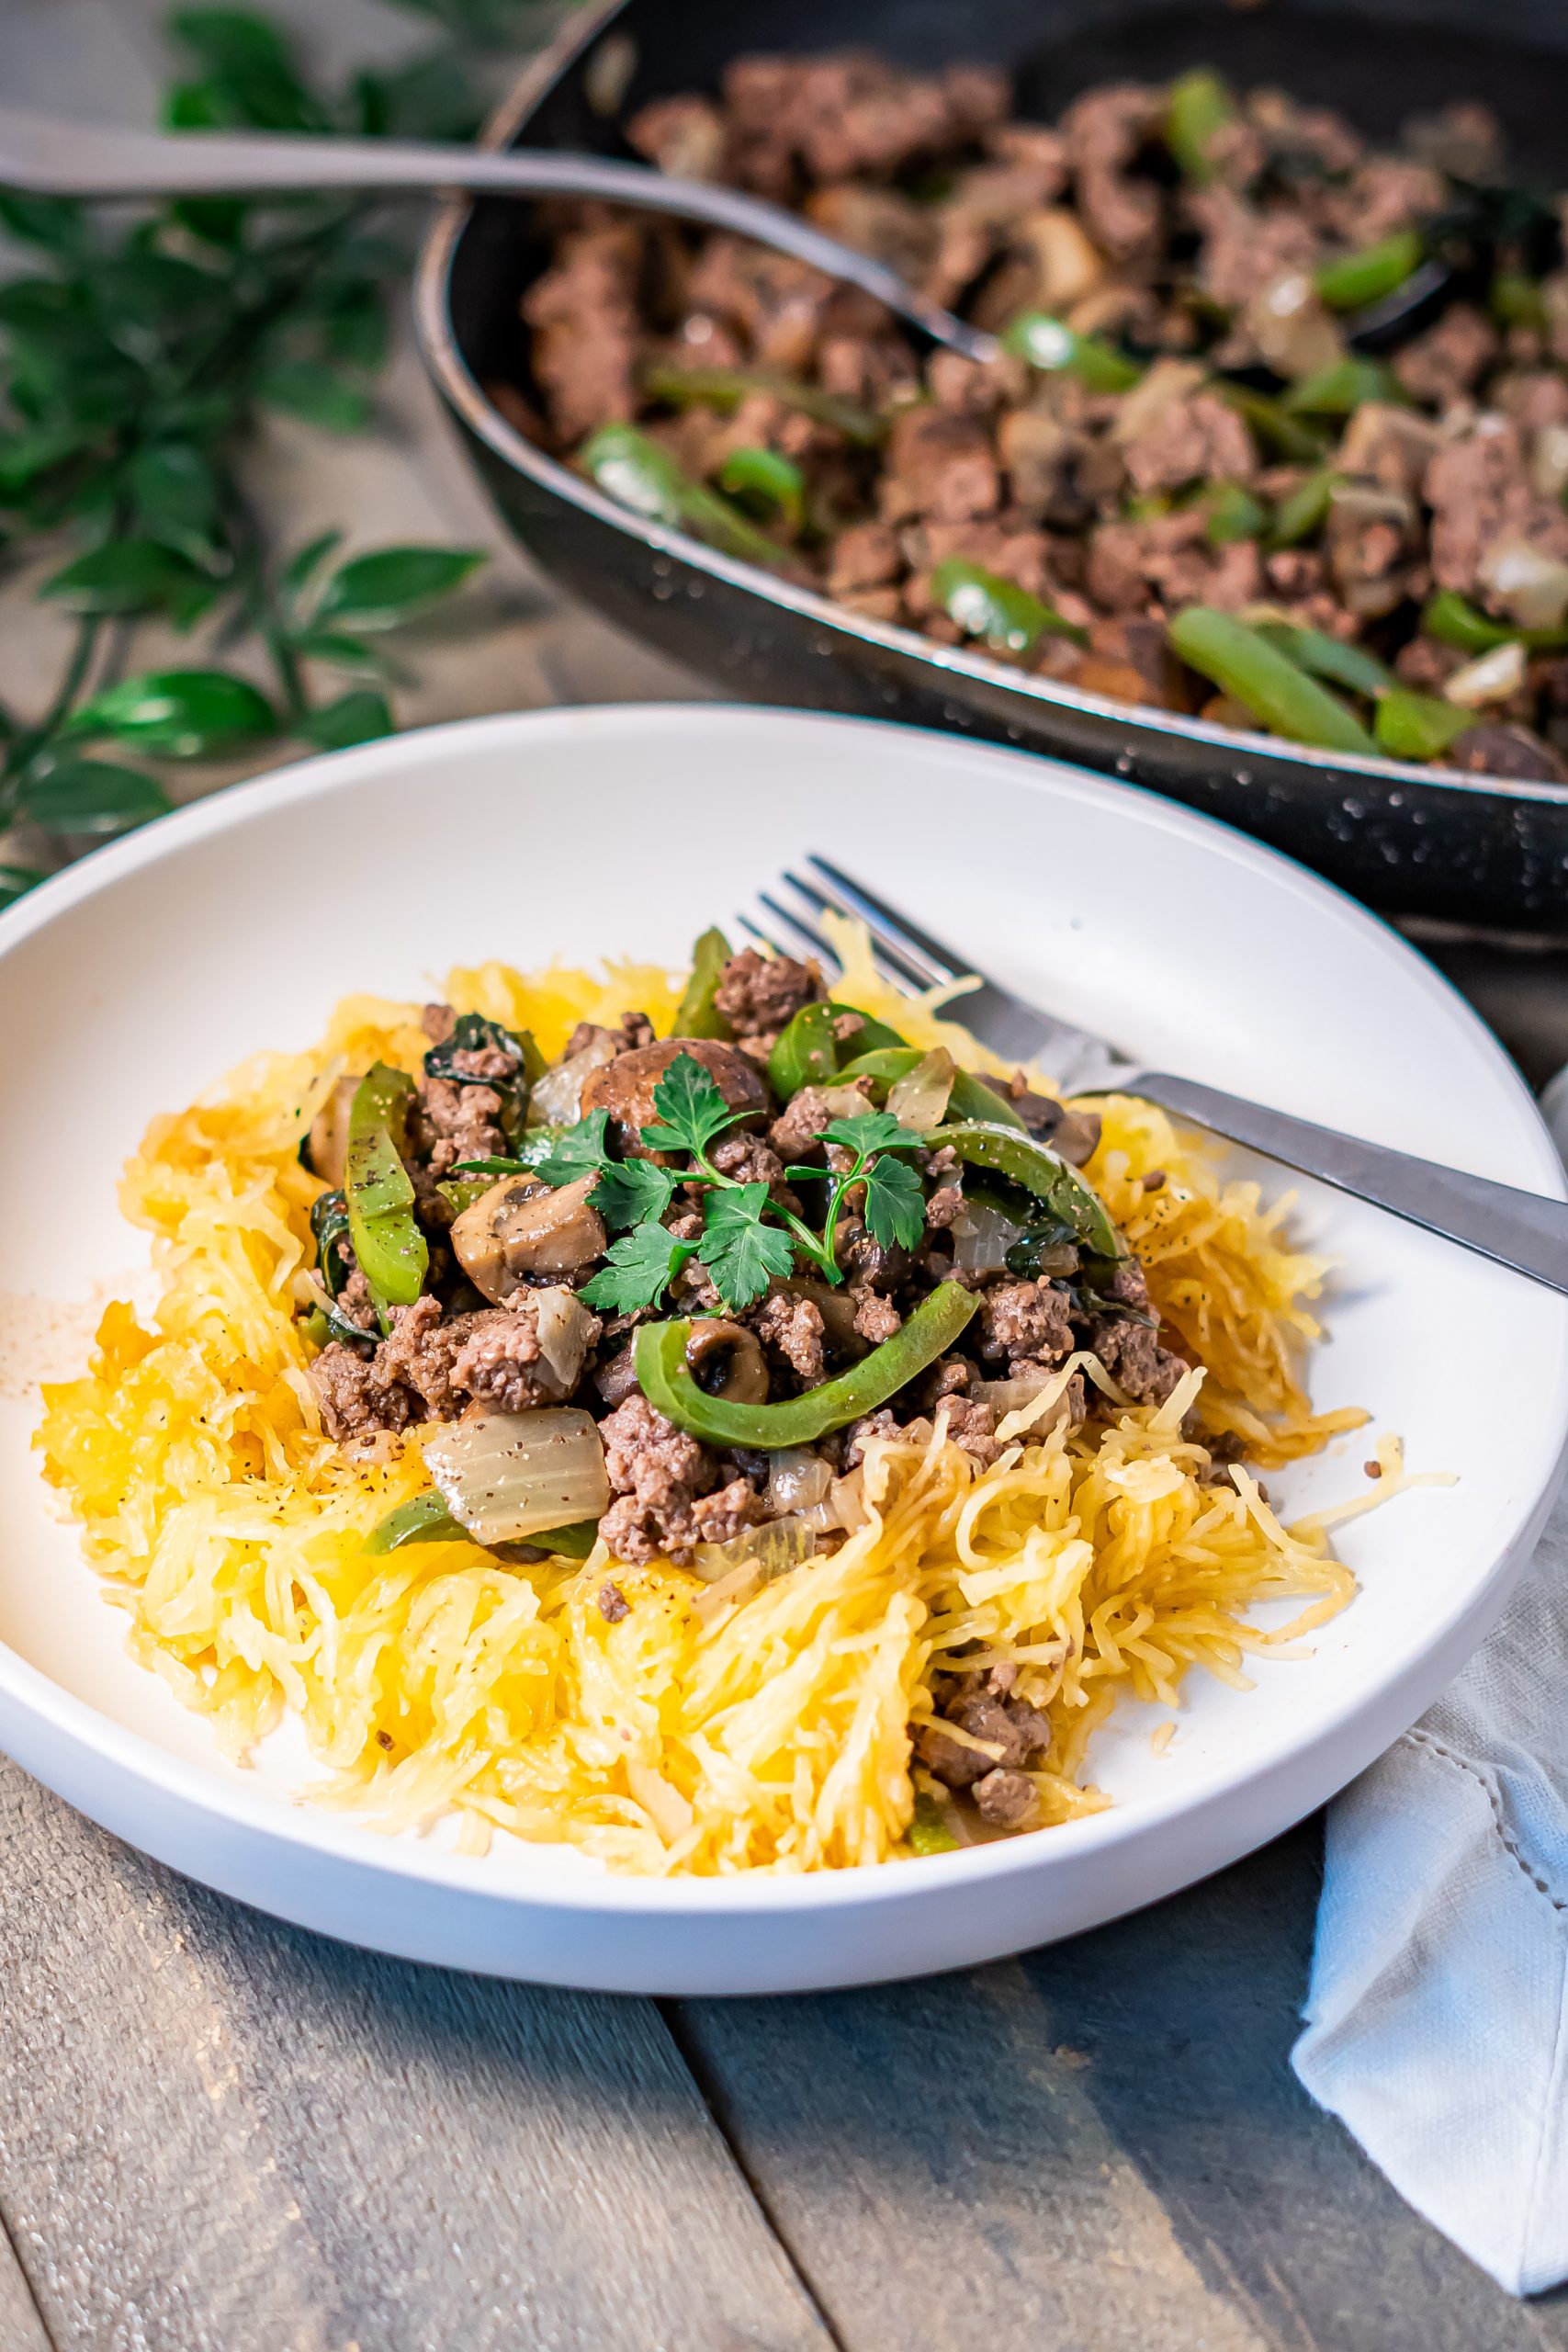 Baked spaghetti squash with beef and veggies served for easy weeknight dinner